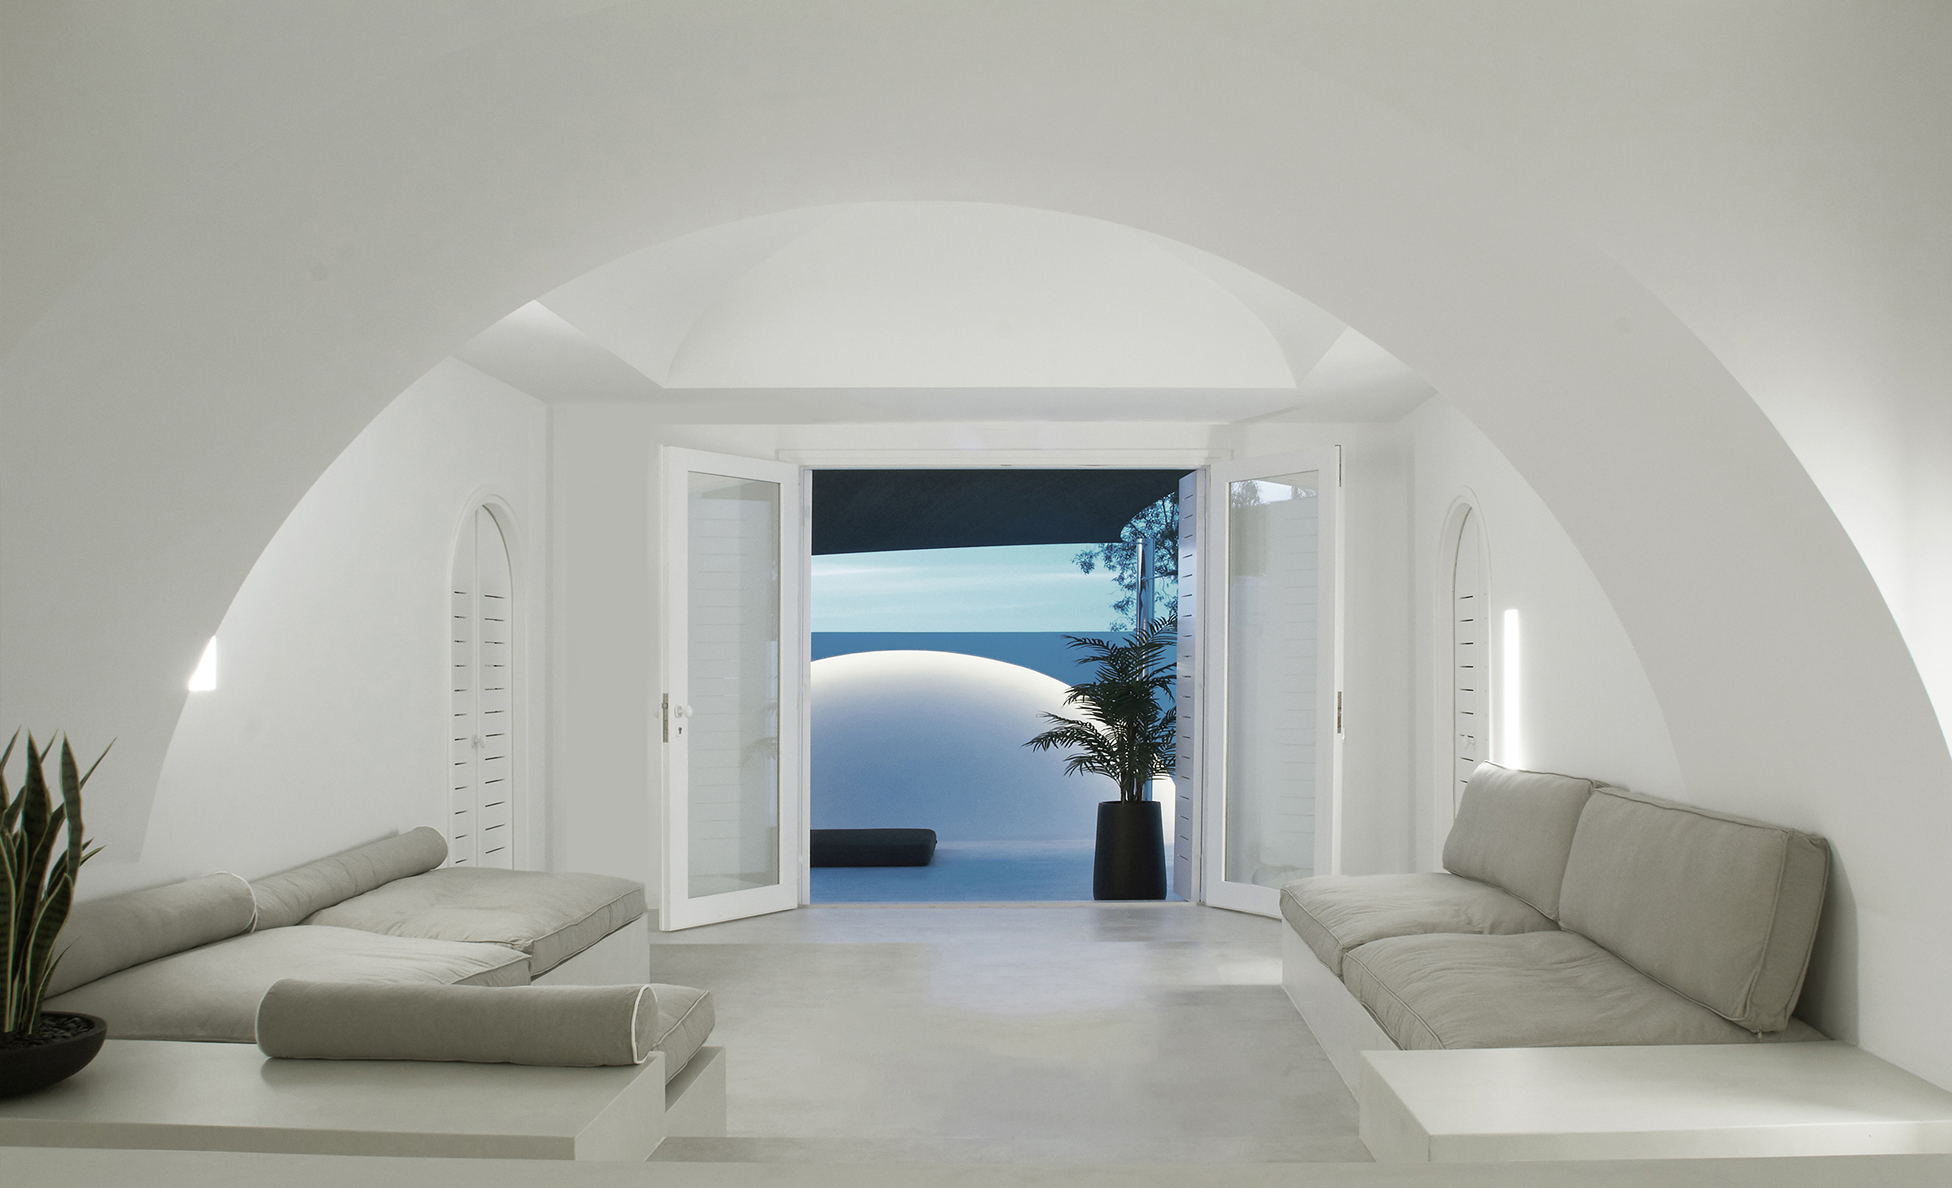 What i did was dance - A family house in Santorini